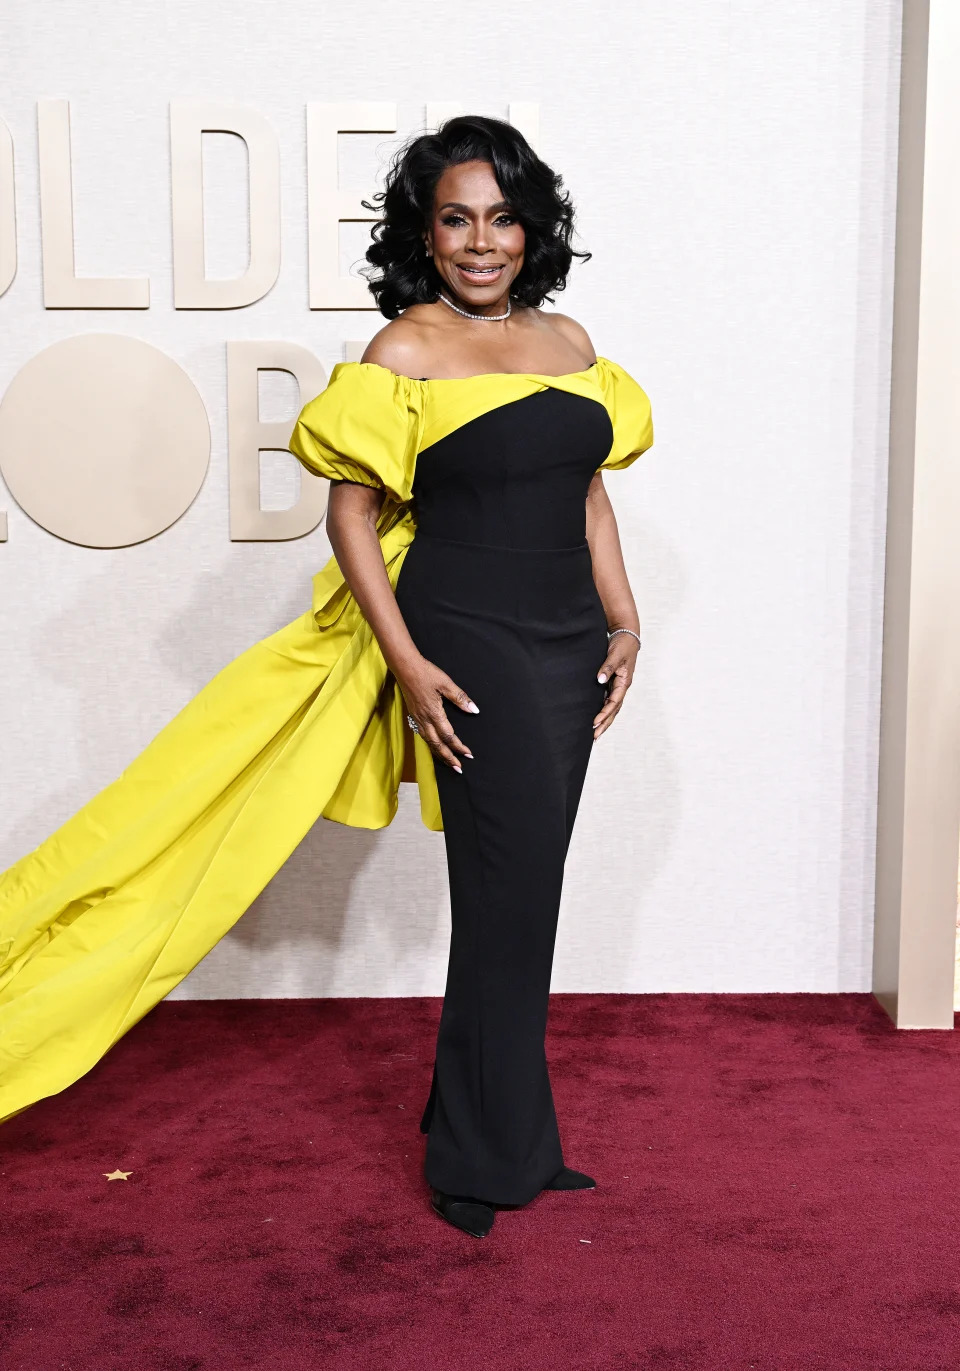 Sheryl Lee Ralph at the 81st Golden Globe Awards held at the Beverly Hilton Hotel on January 7, 2024 in Beverly Hills, California. (Photo by Gilbert Flores/Golden Globes 2024/Golden Globes 2024 via Getty Images)